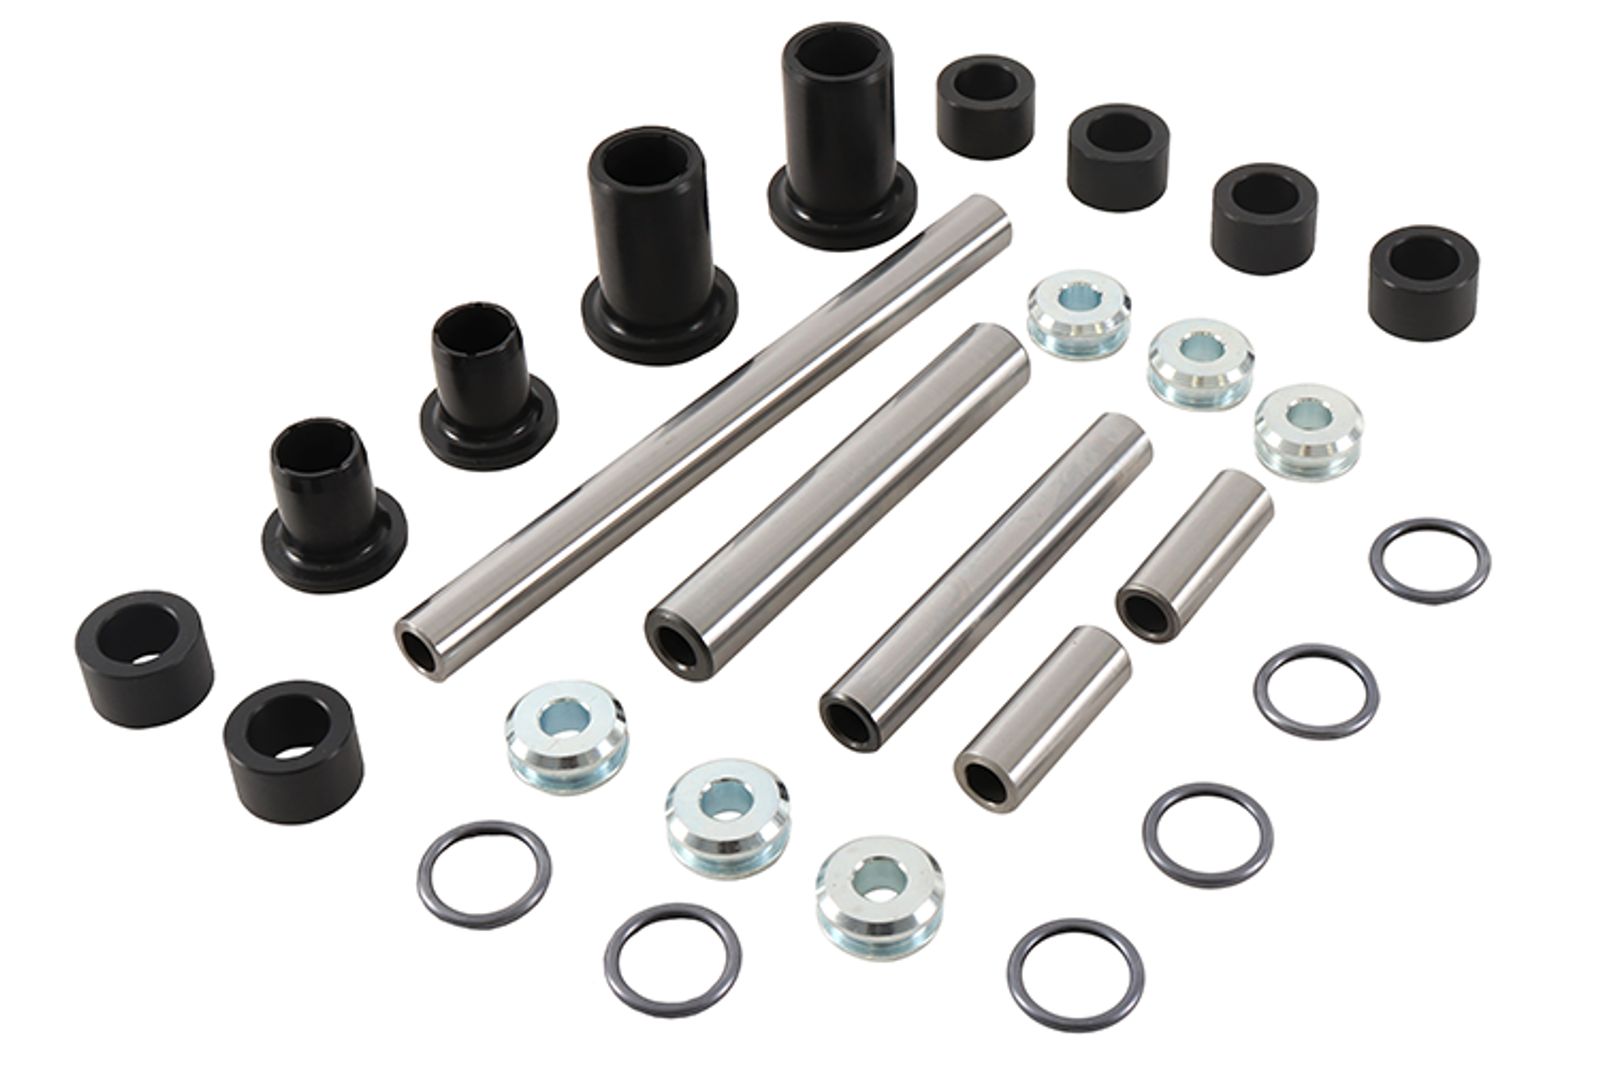 Wrp Rear Ind. Suspension Kits - WRP501197 image